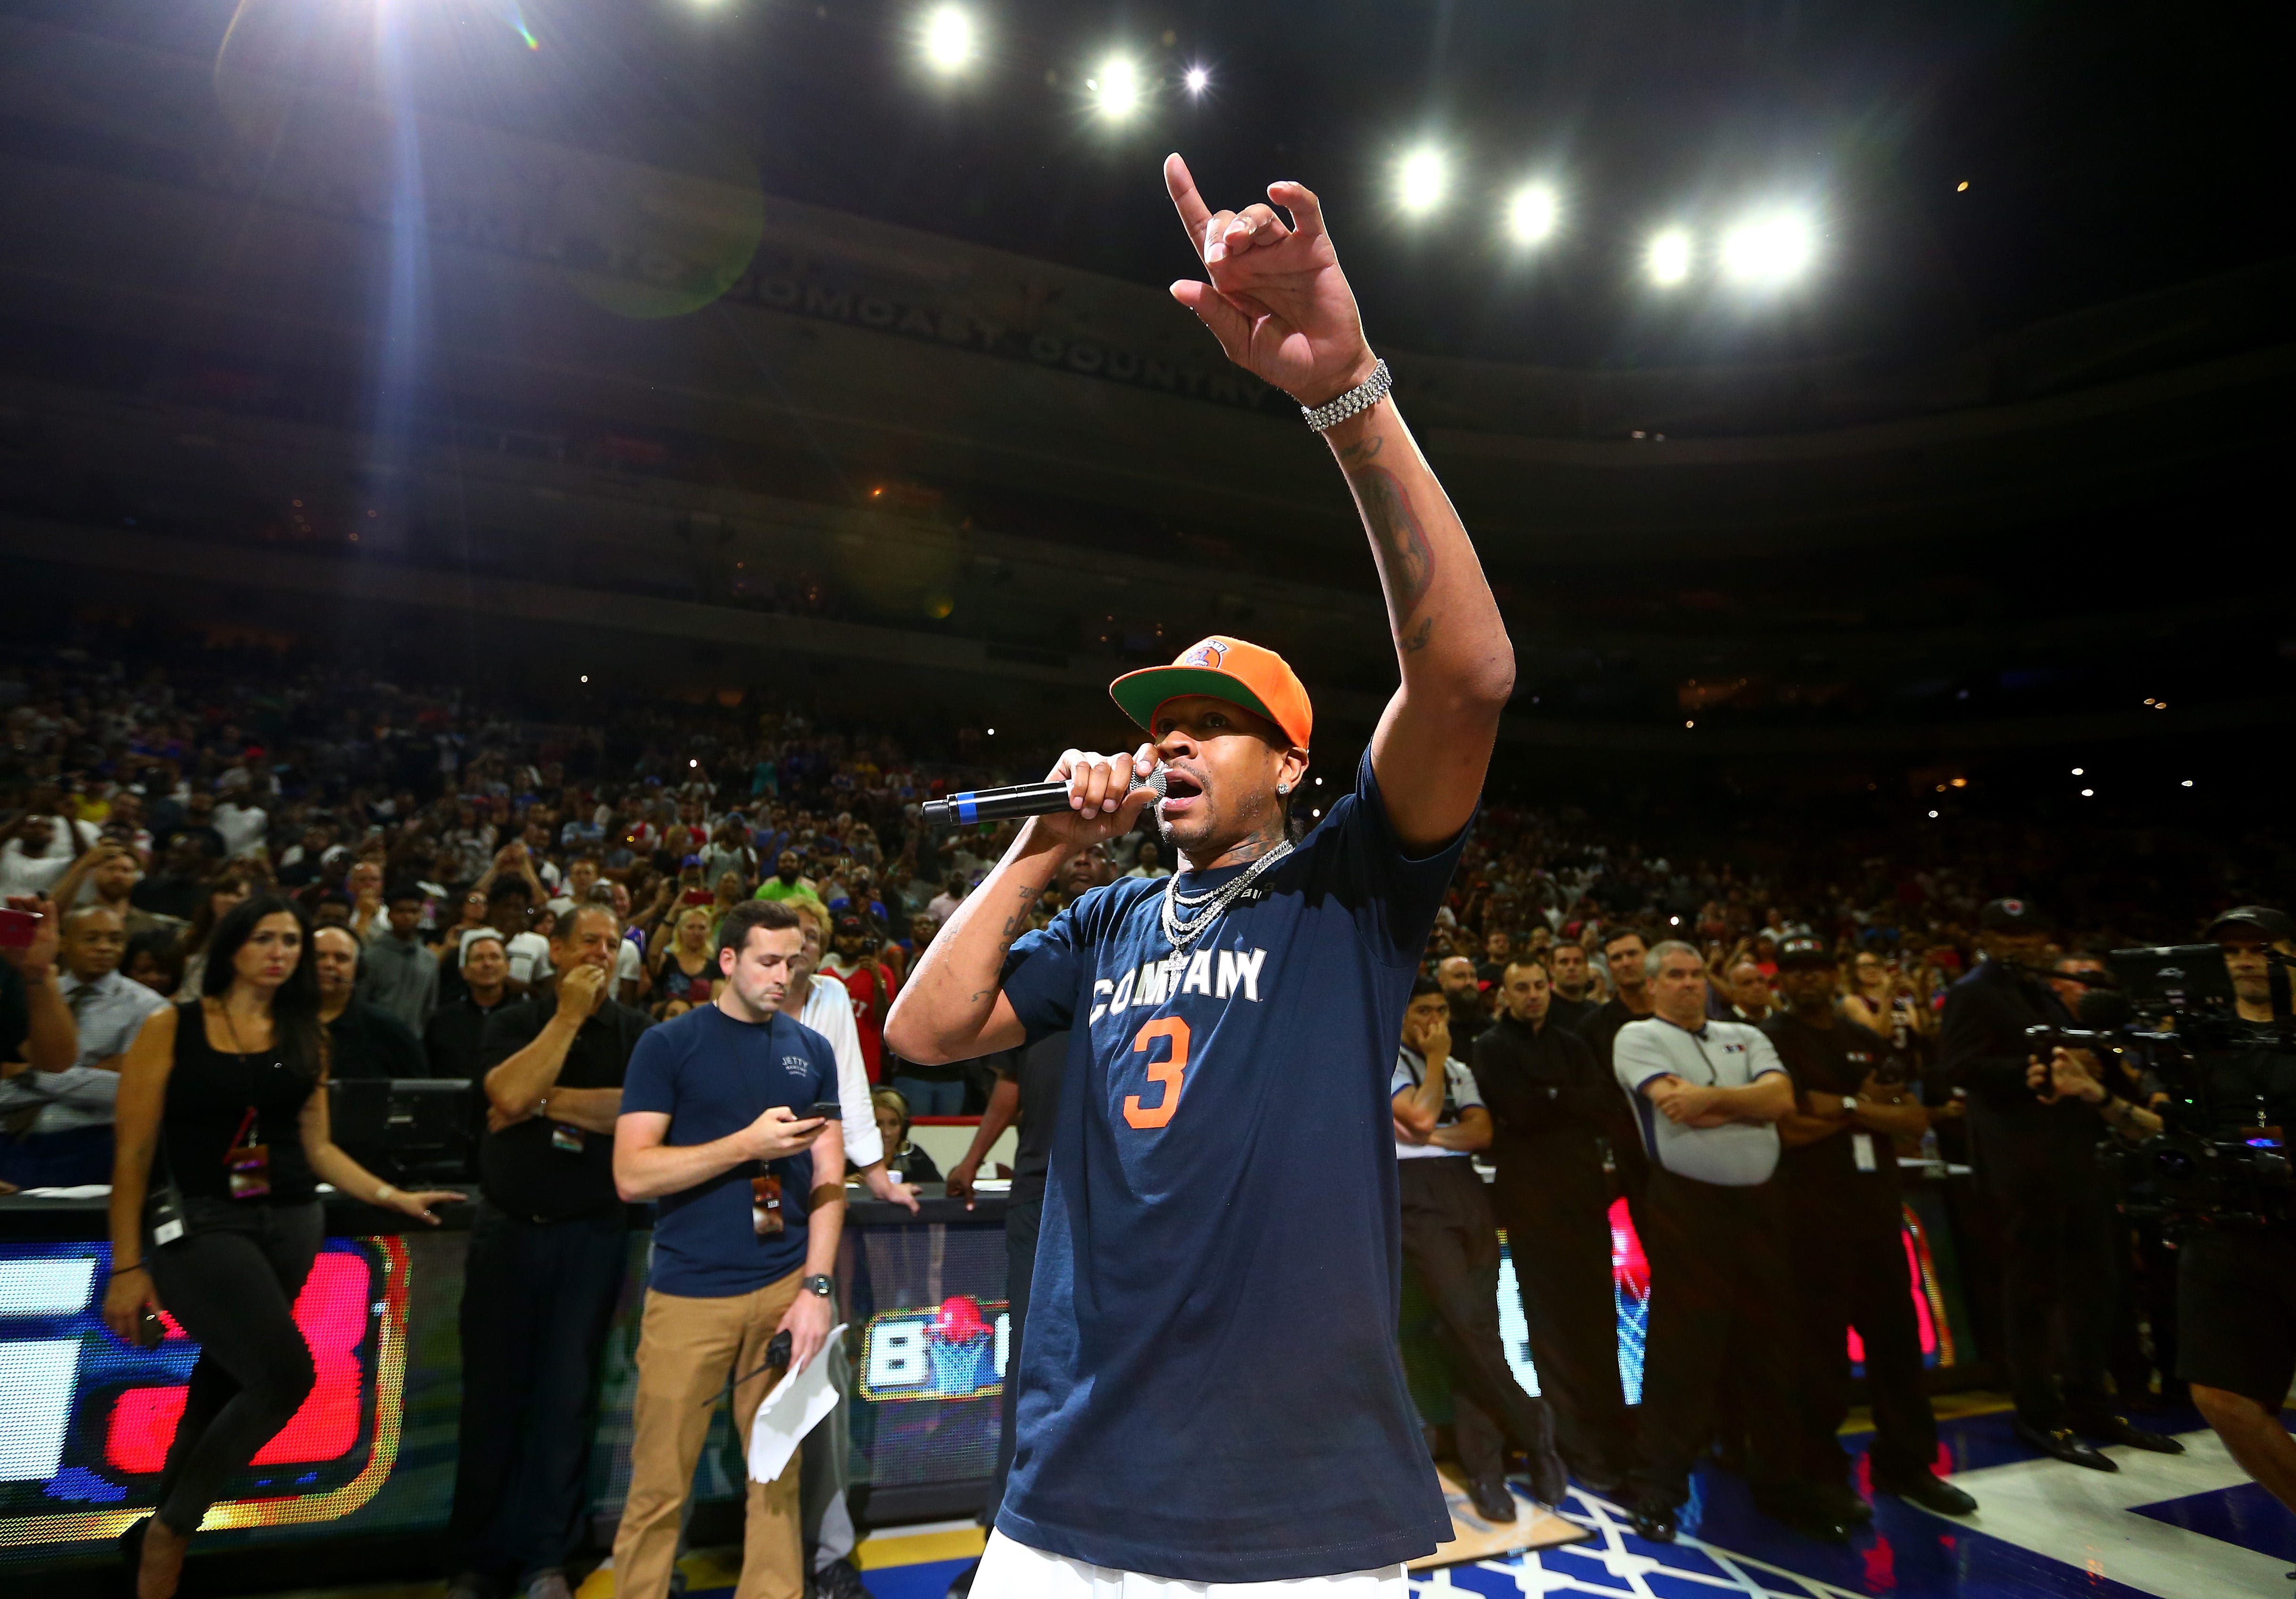 Ice Cube hopes BIG3 can make amends with Philly